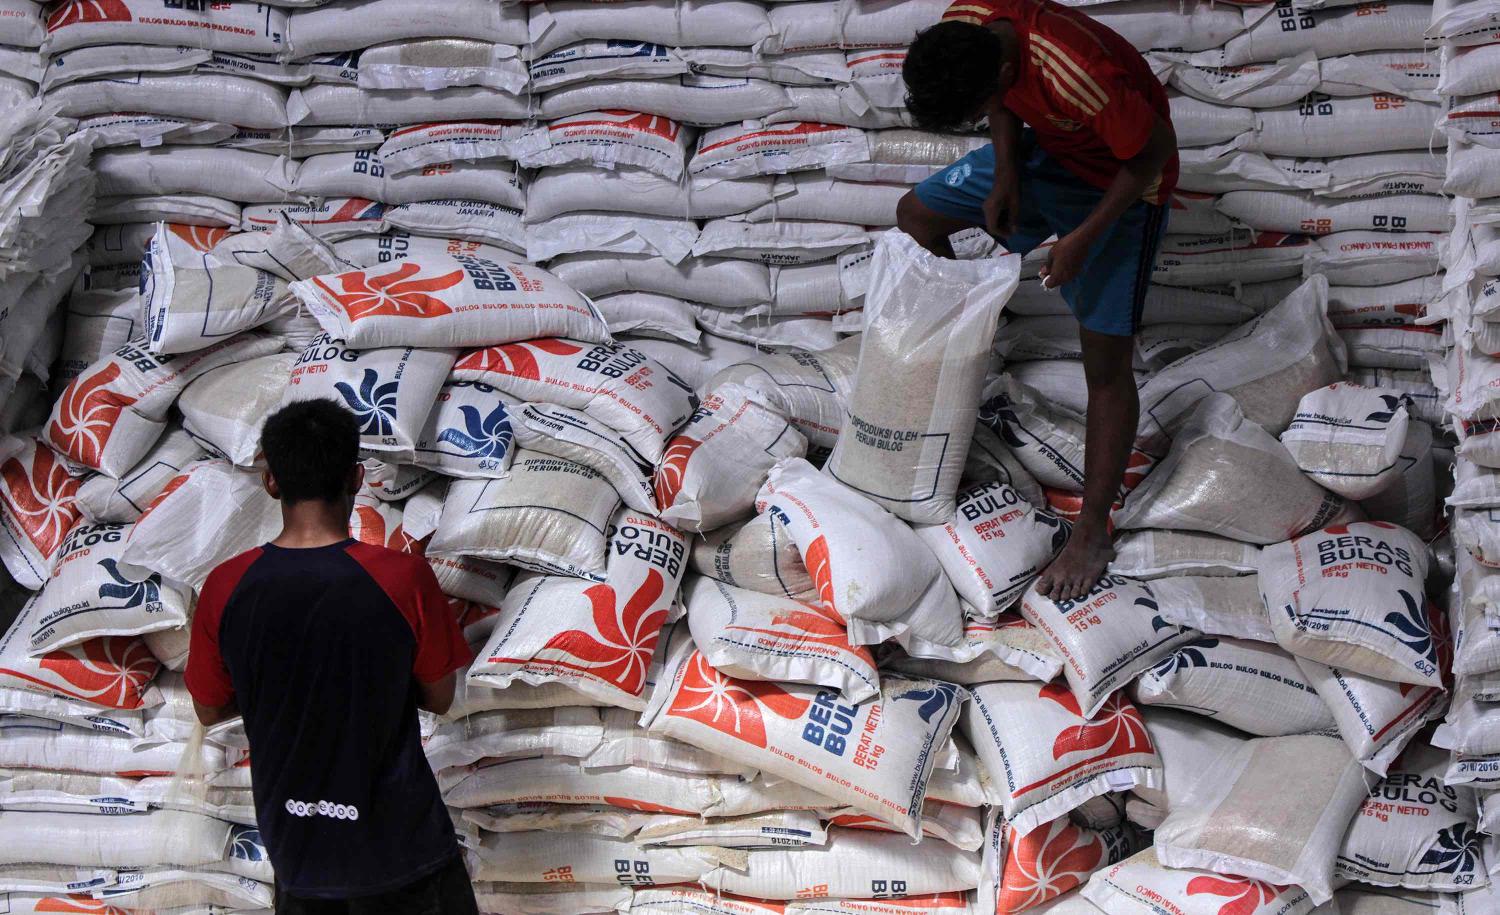 Workers distribute free rice packages from a warehouse in Aceh (Photo: Maskur Has/Getty)